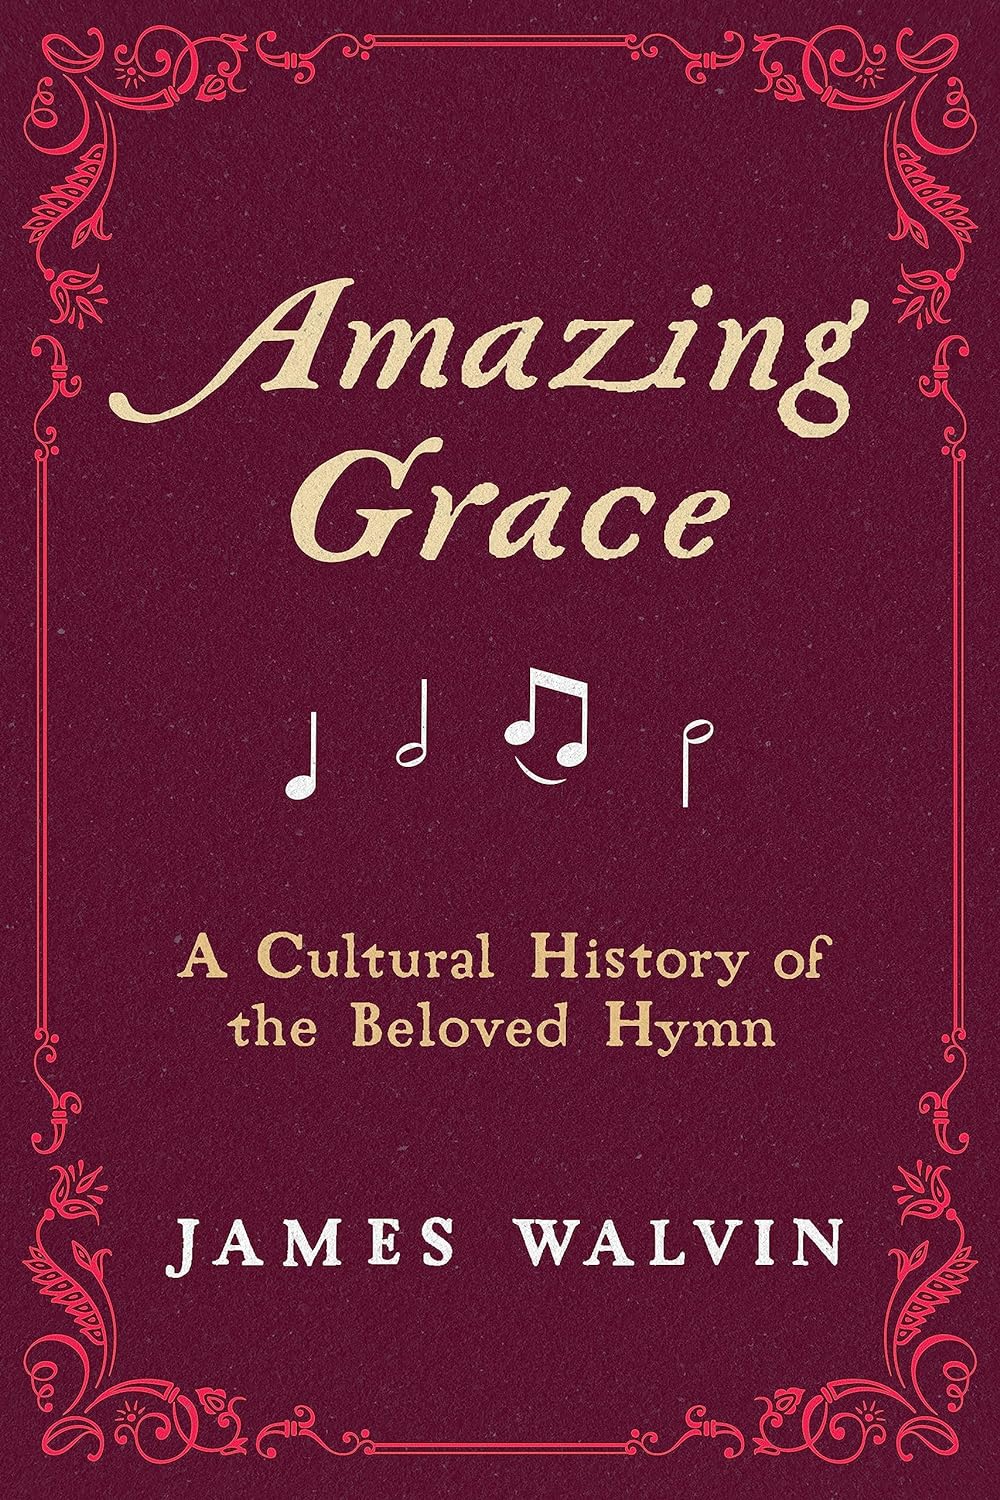 Amazing_Grace_A_cultural_history_of_the_beloved_hymn_book_cover